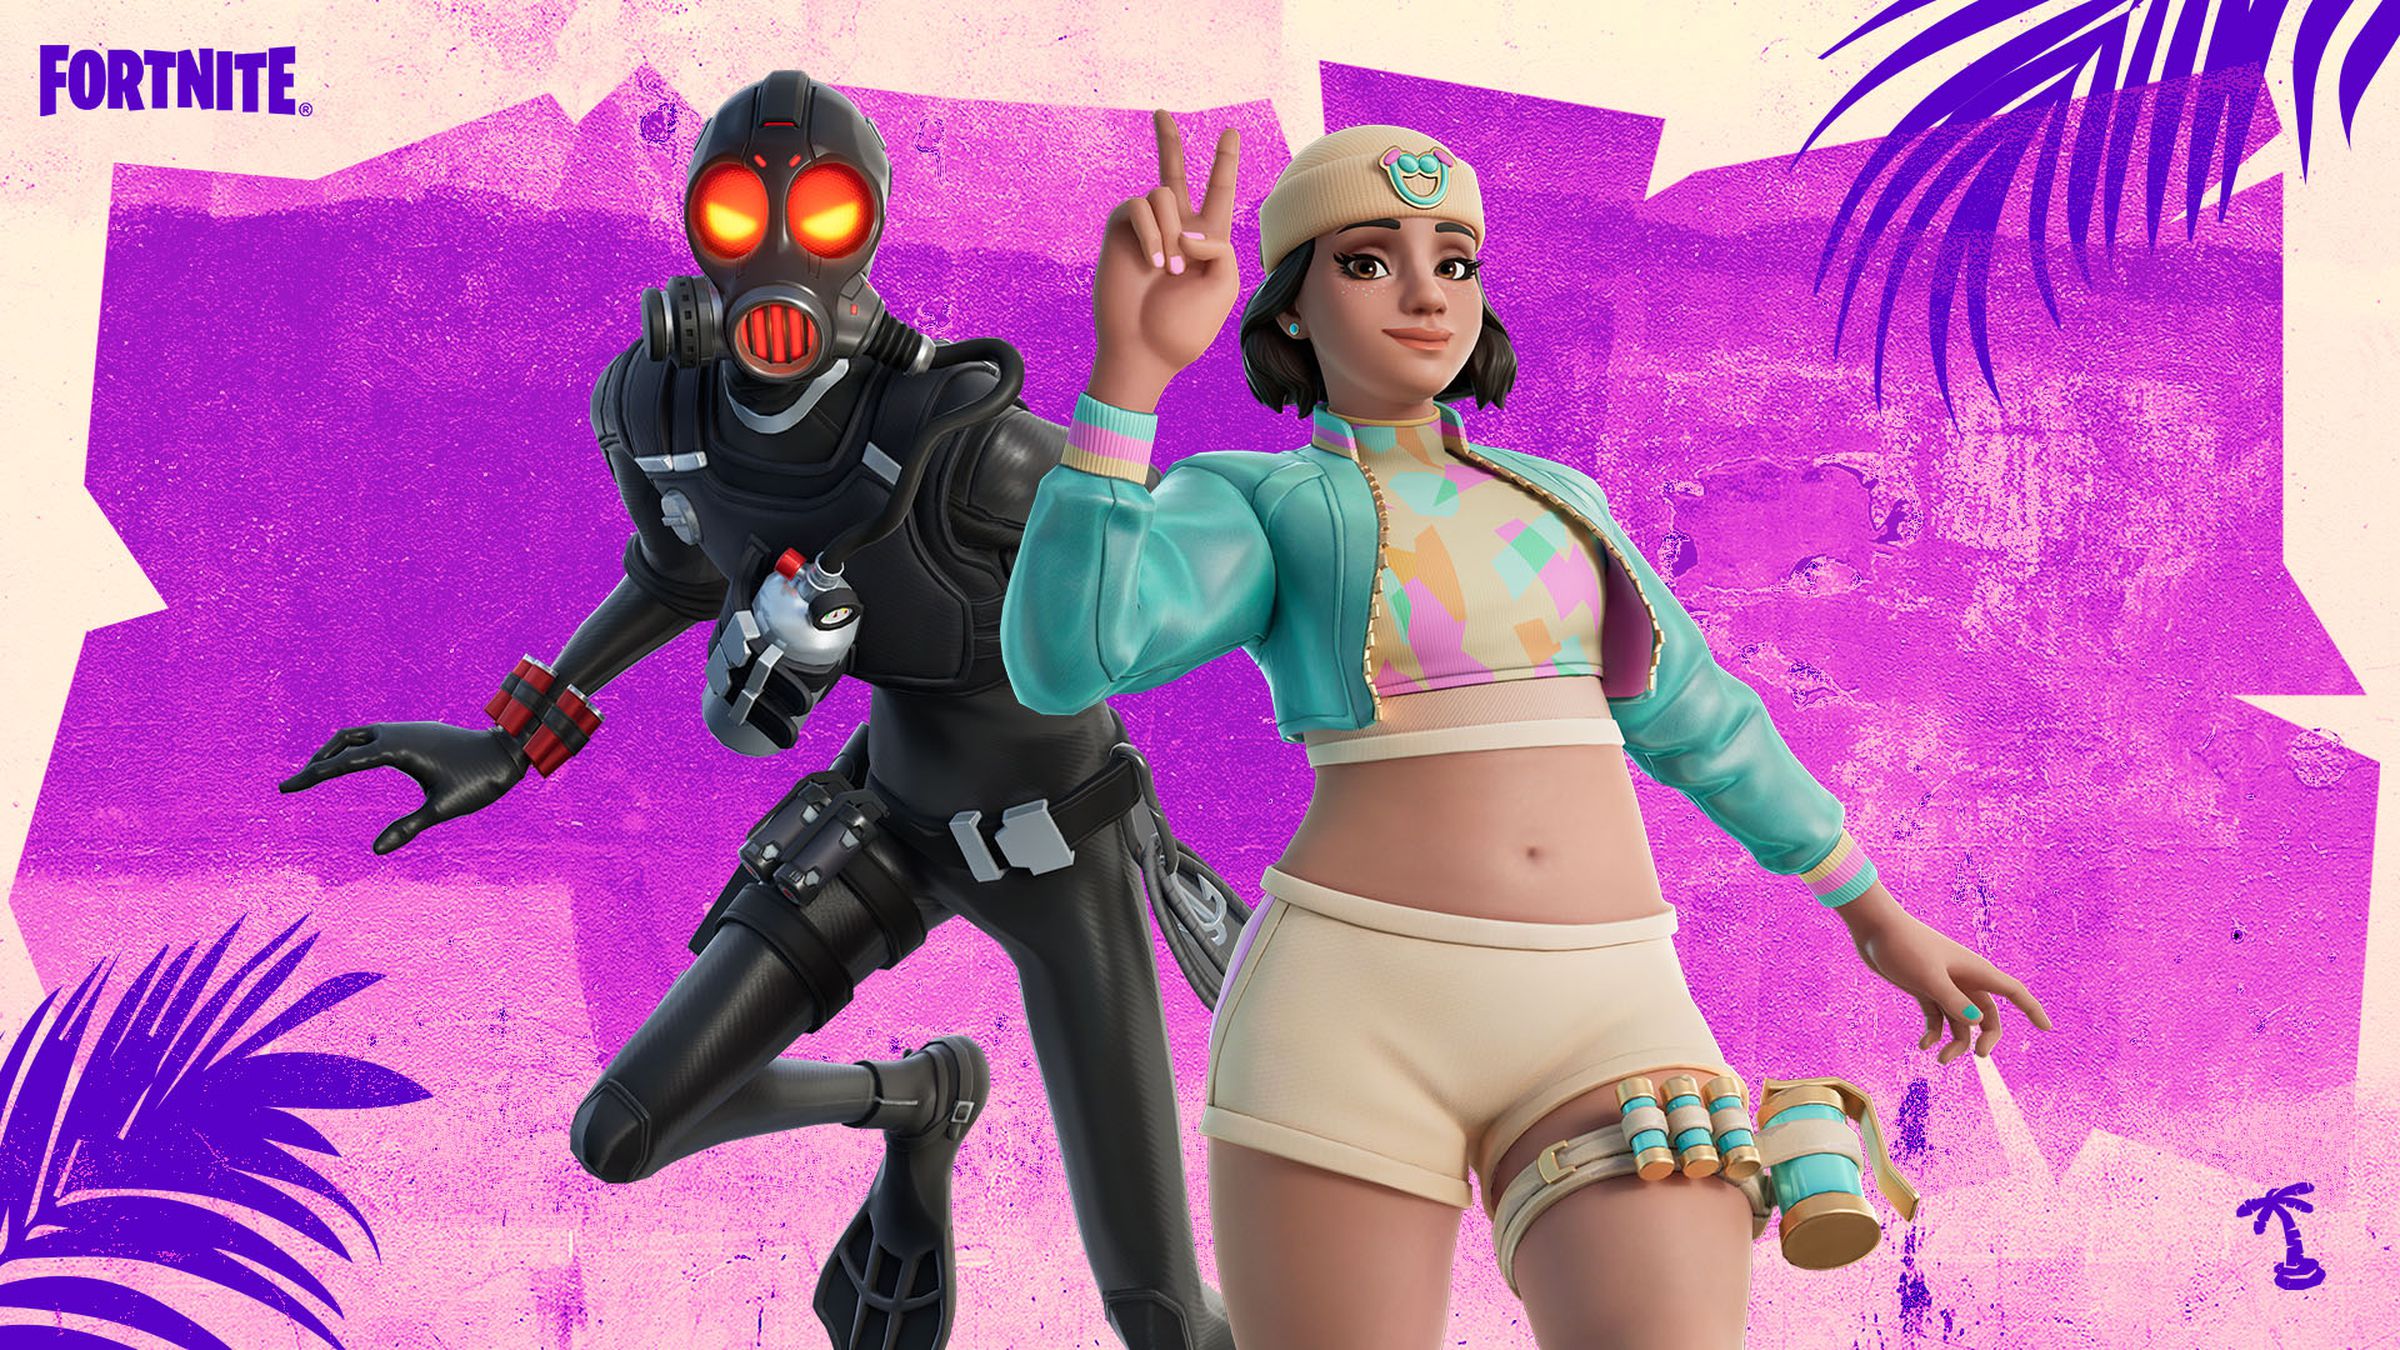 Two characters from Fortnite.